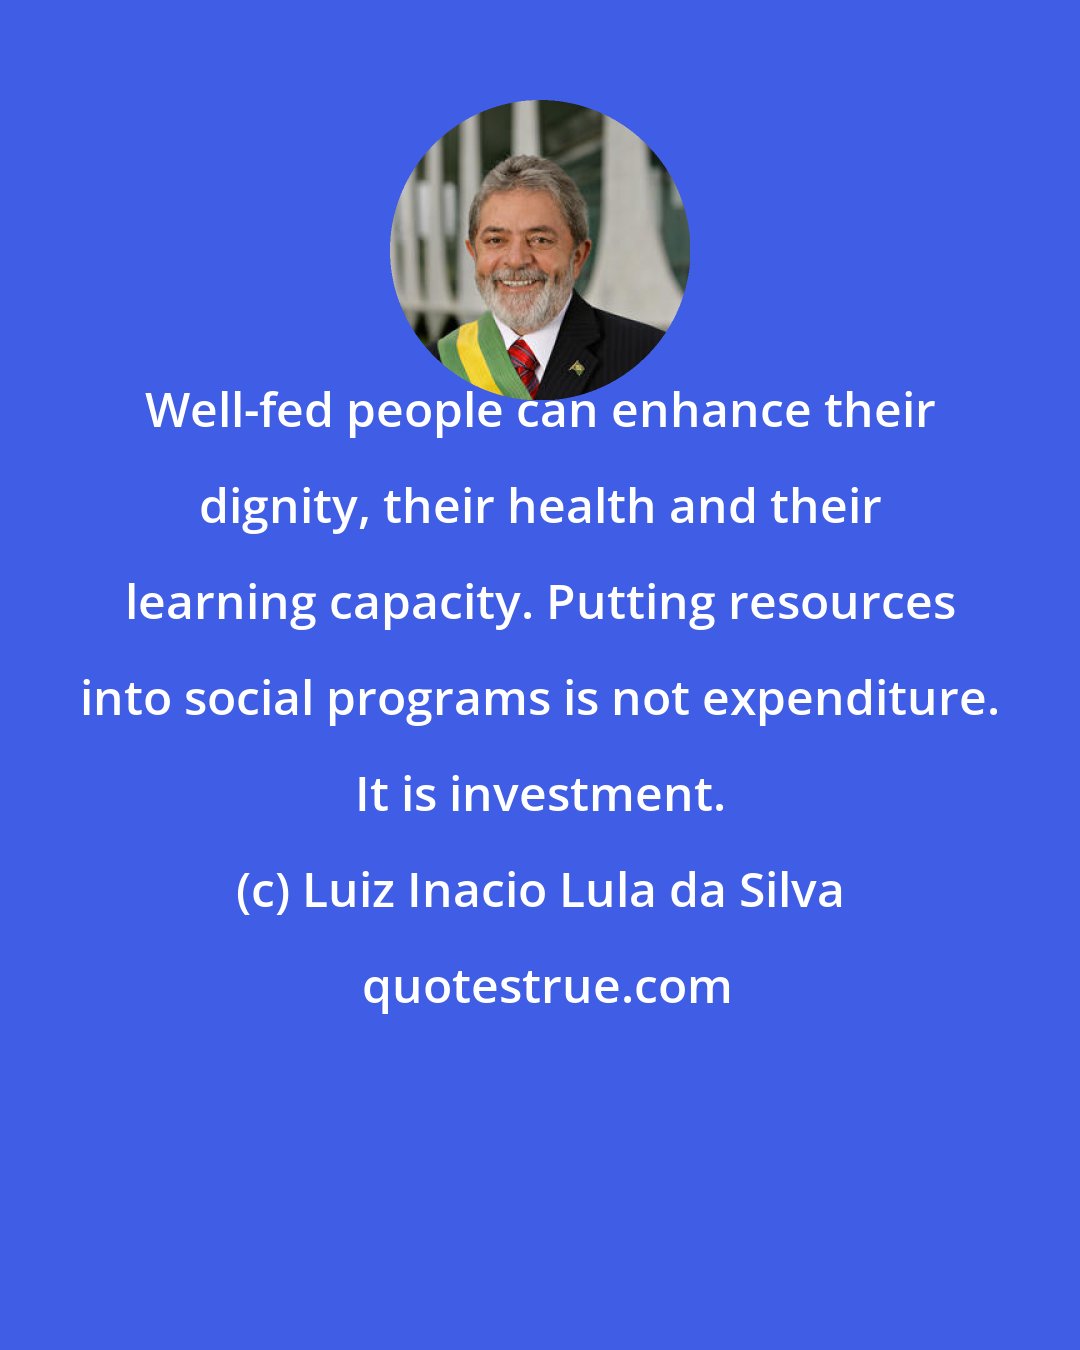 Luiz Inacio Lula da Silva: Well-fed people can enhance their dignity, their health and their learning capacity. Putting resources into social programs is not expenditure. It is investment.